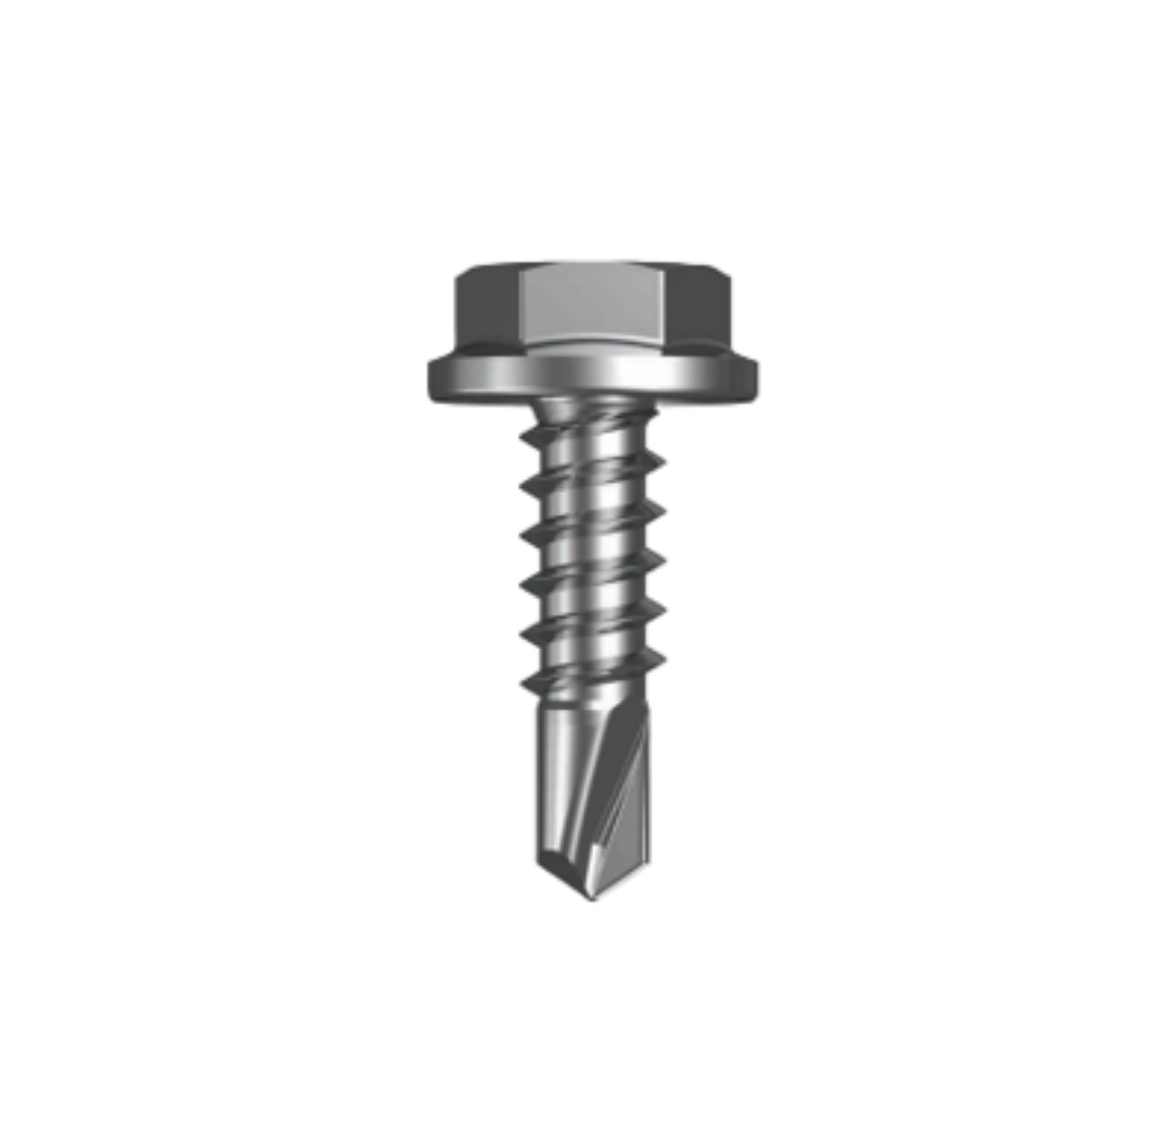 Picture of Metal Self Drilling Screws Flanged Hex CL4 MET SEAL HX S:12-14X 55